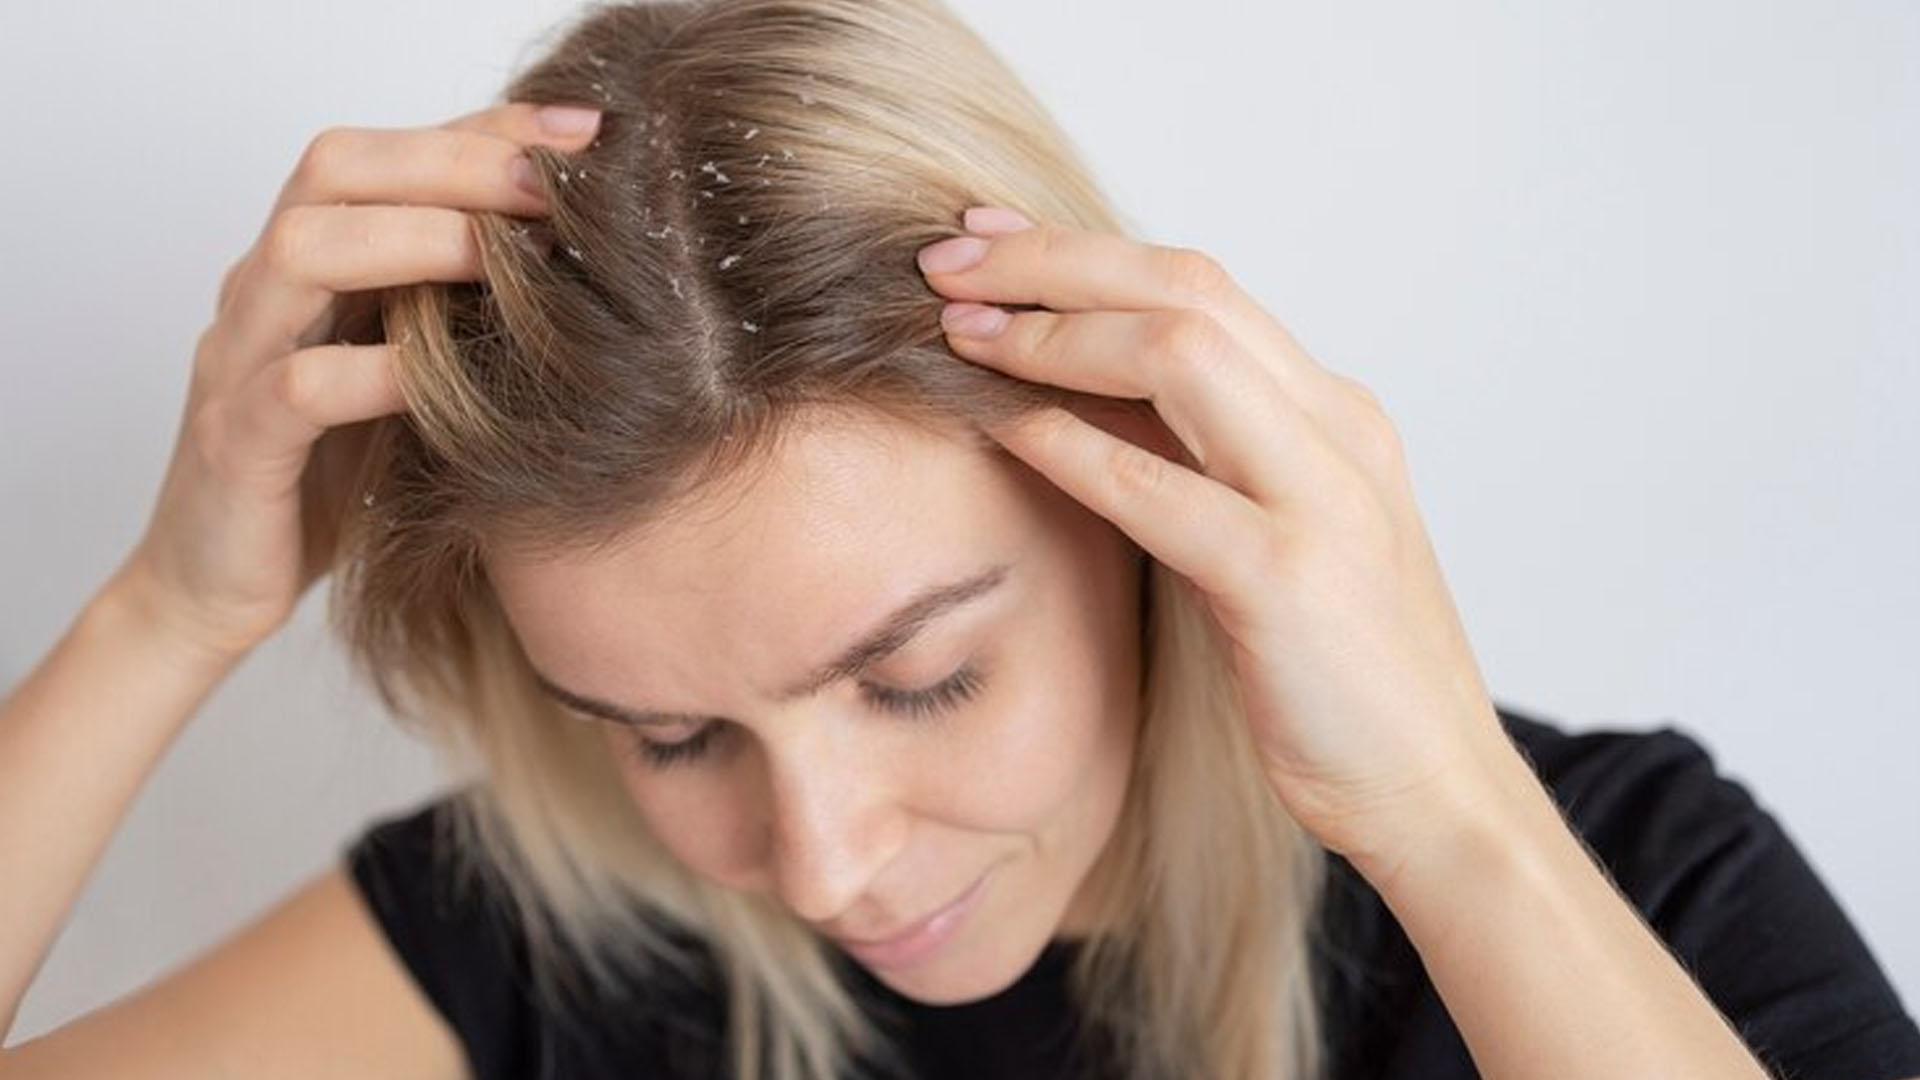 What are the Home Remedies for Dandruff?